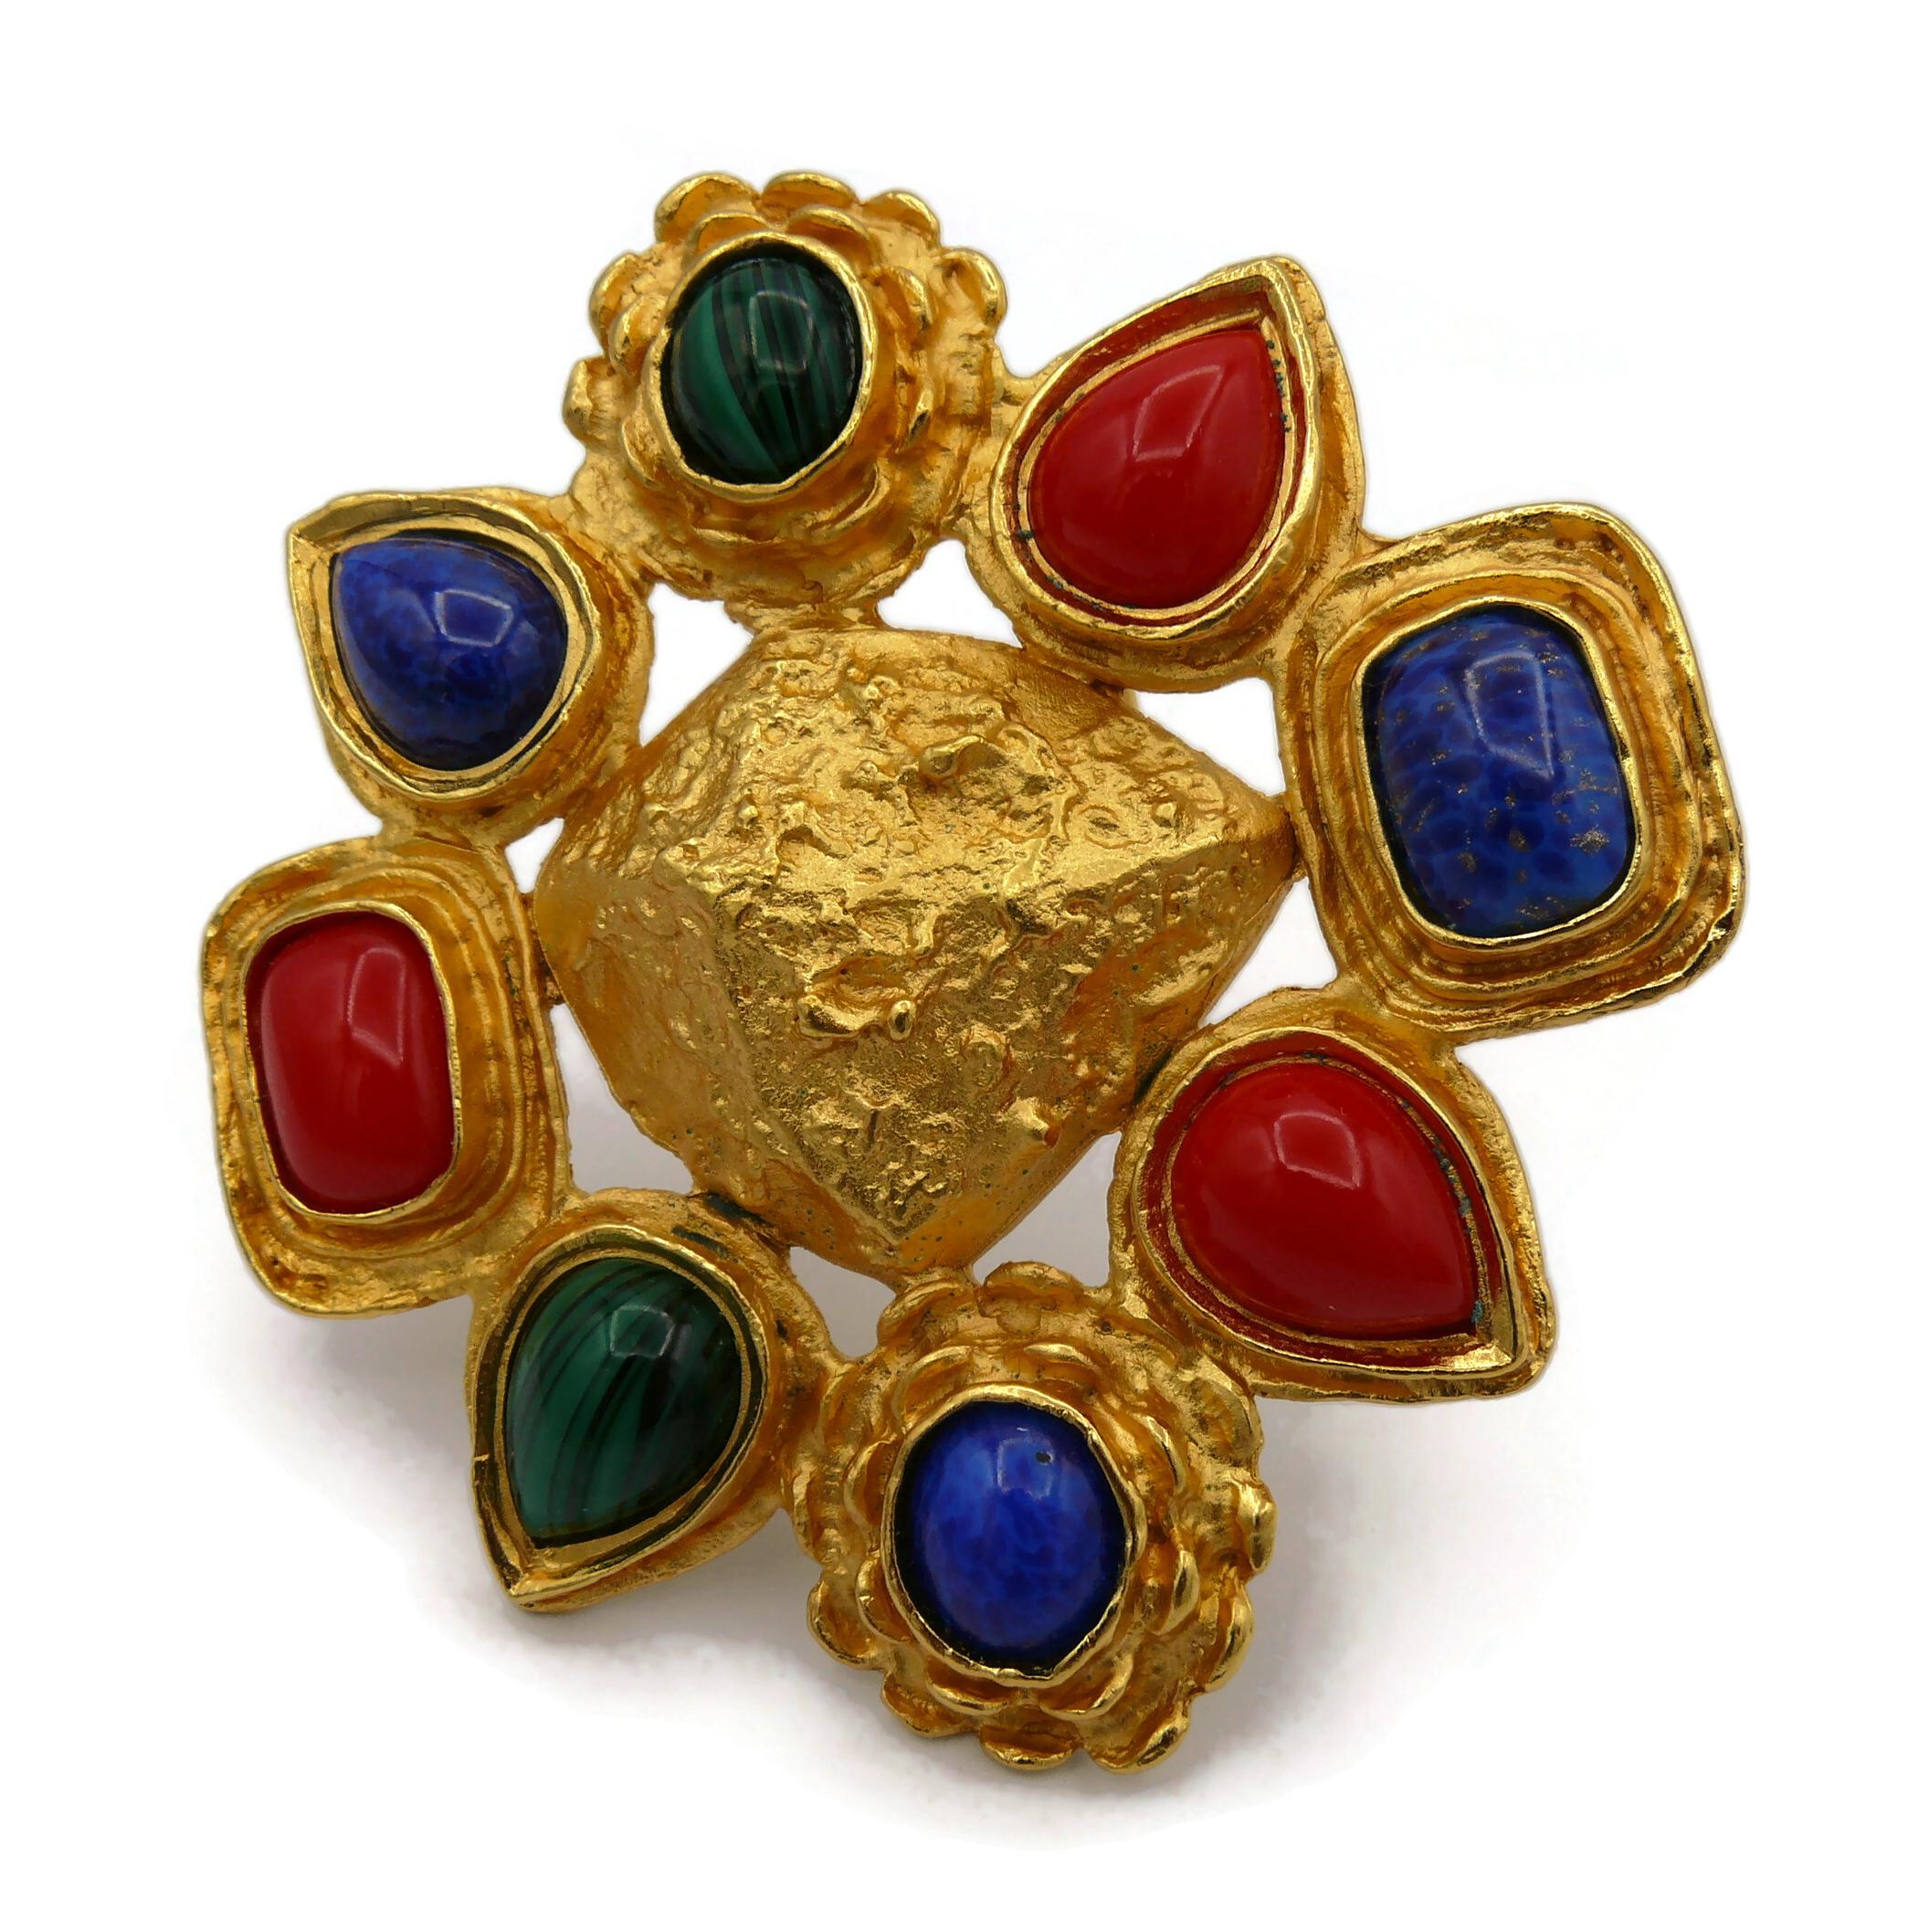 CHRISTIAN LACROIX Vintage Massive Gold Tone and Faux Gemstones Brooch For Sale 2